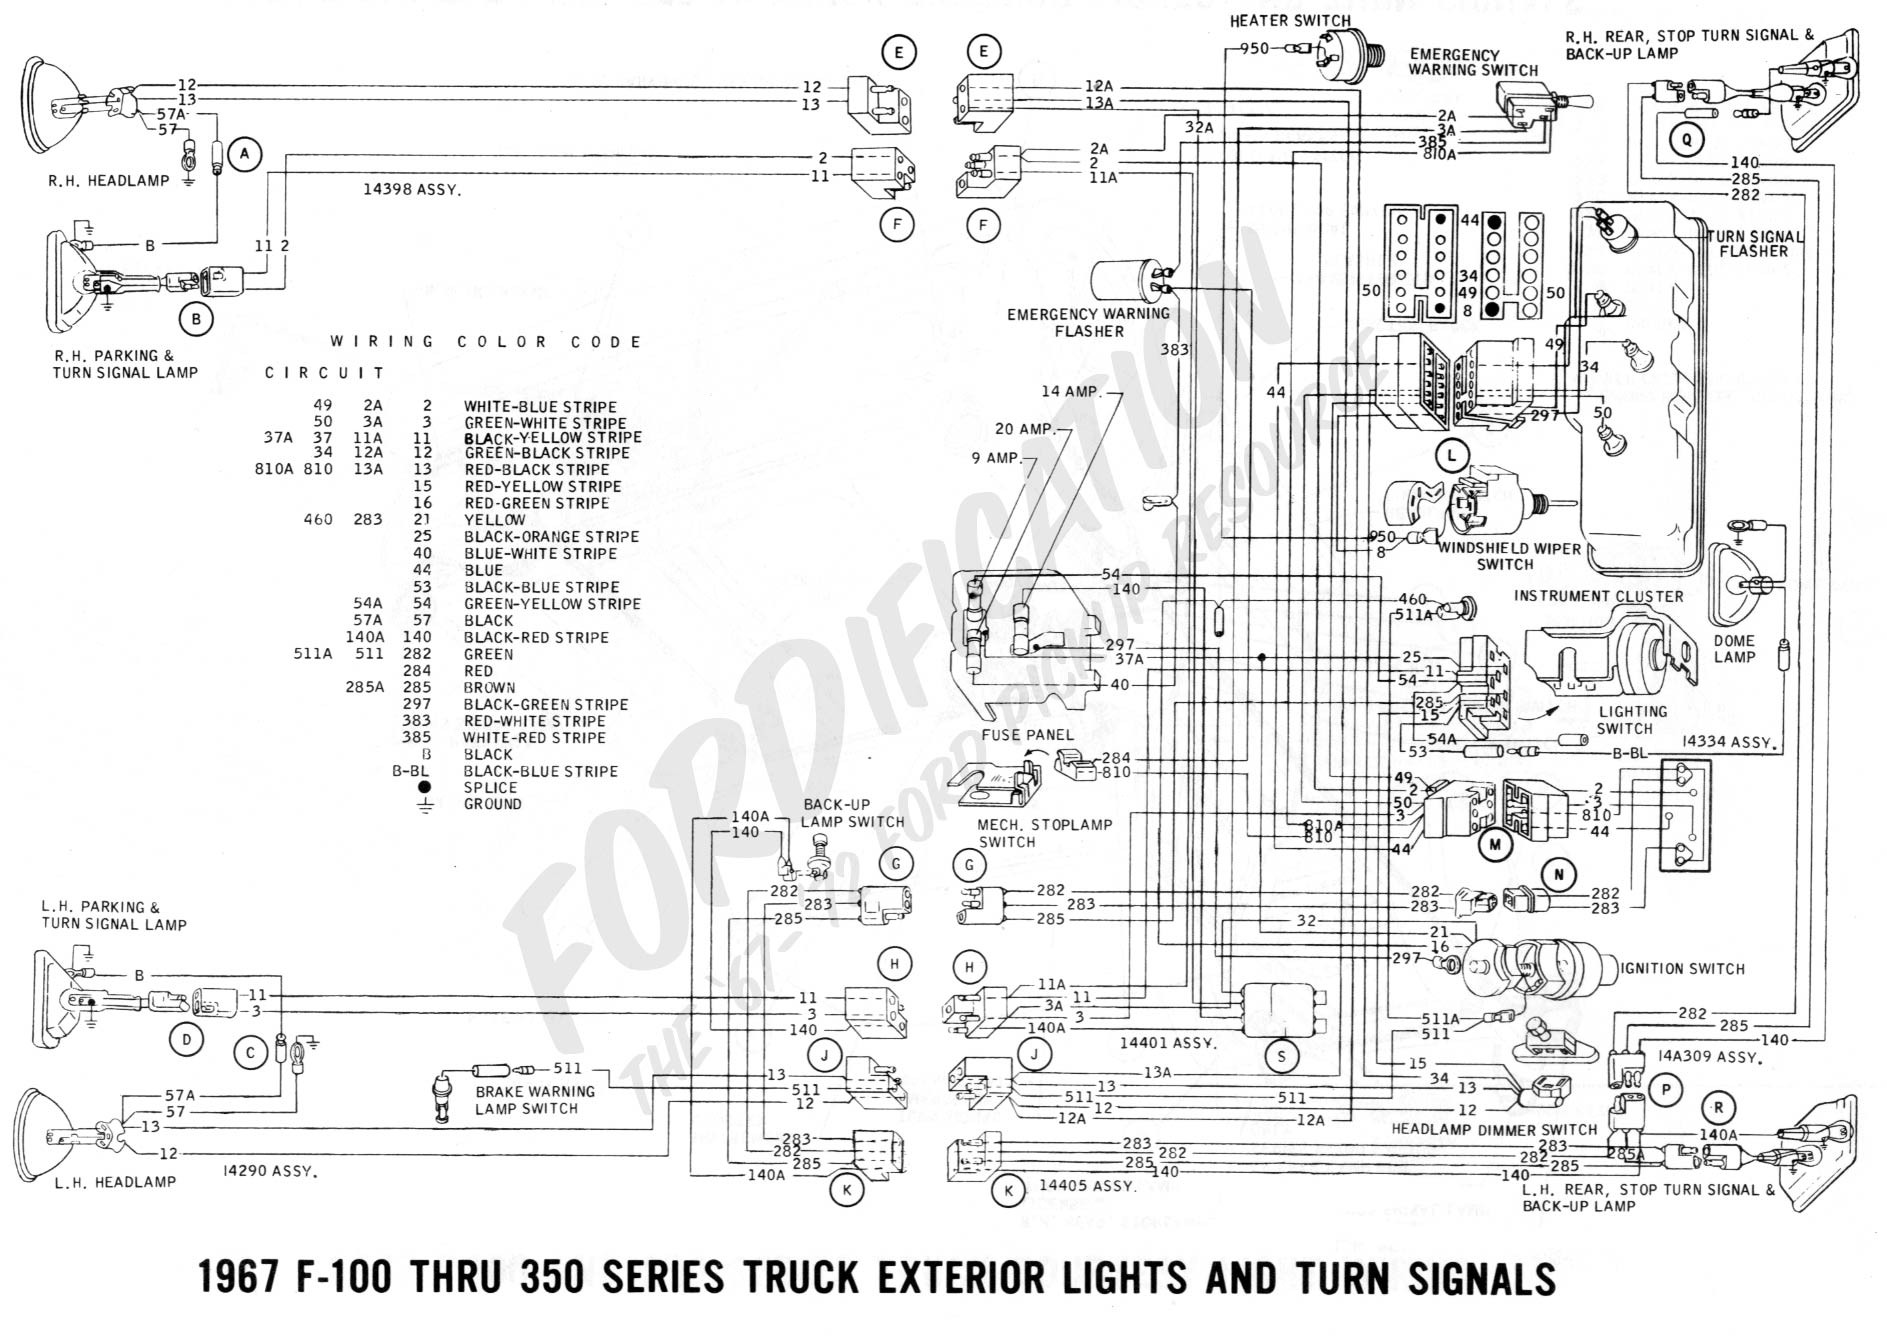 Blinker Wiring Diagram ford Truck Technical Drawings and Schematics Section H Wiring Of Blinker Wiring Diagram